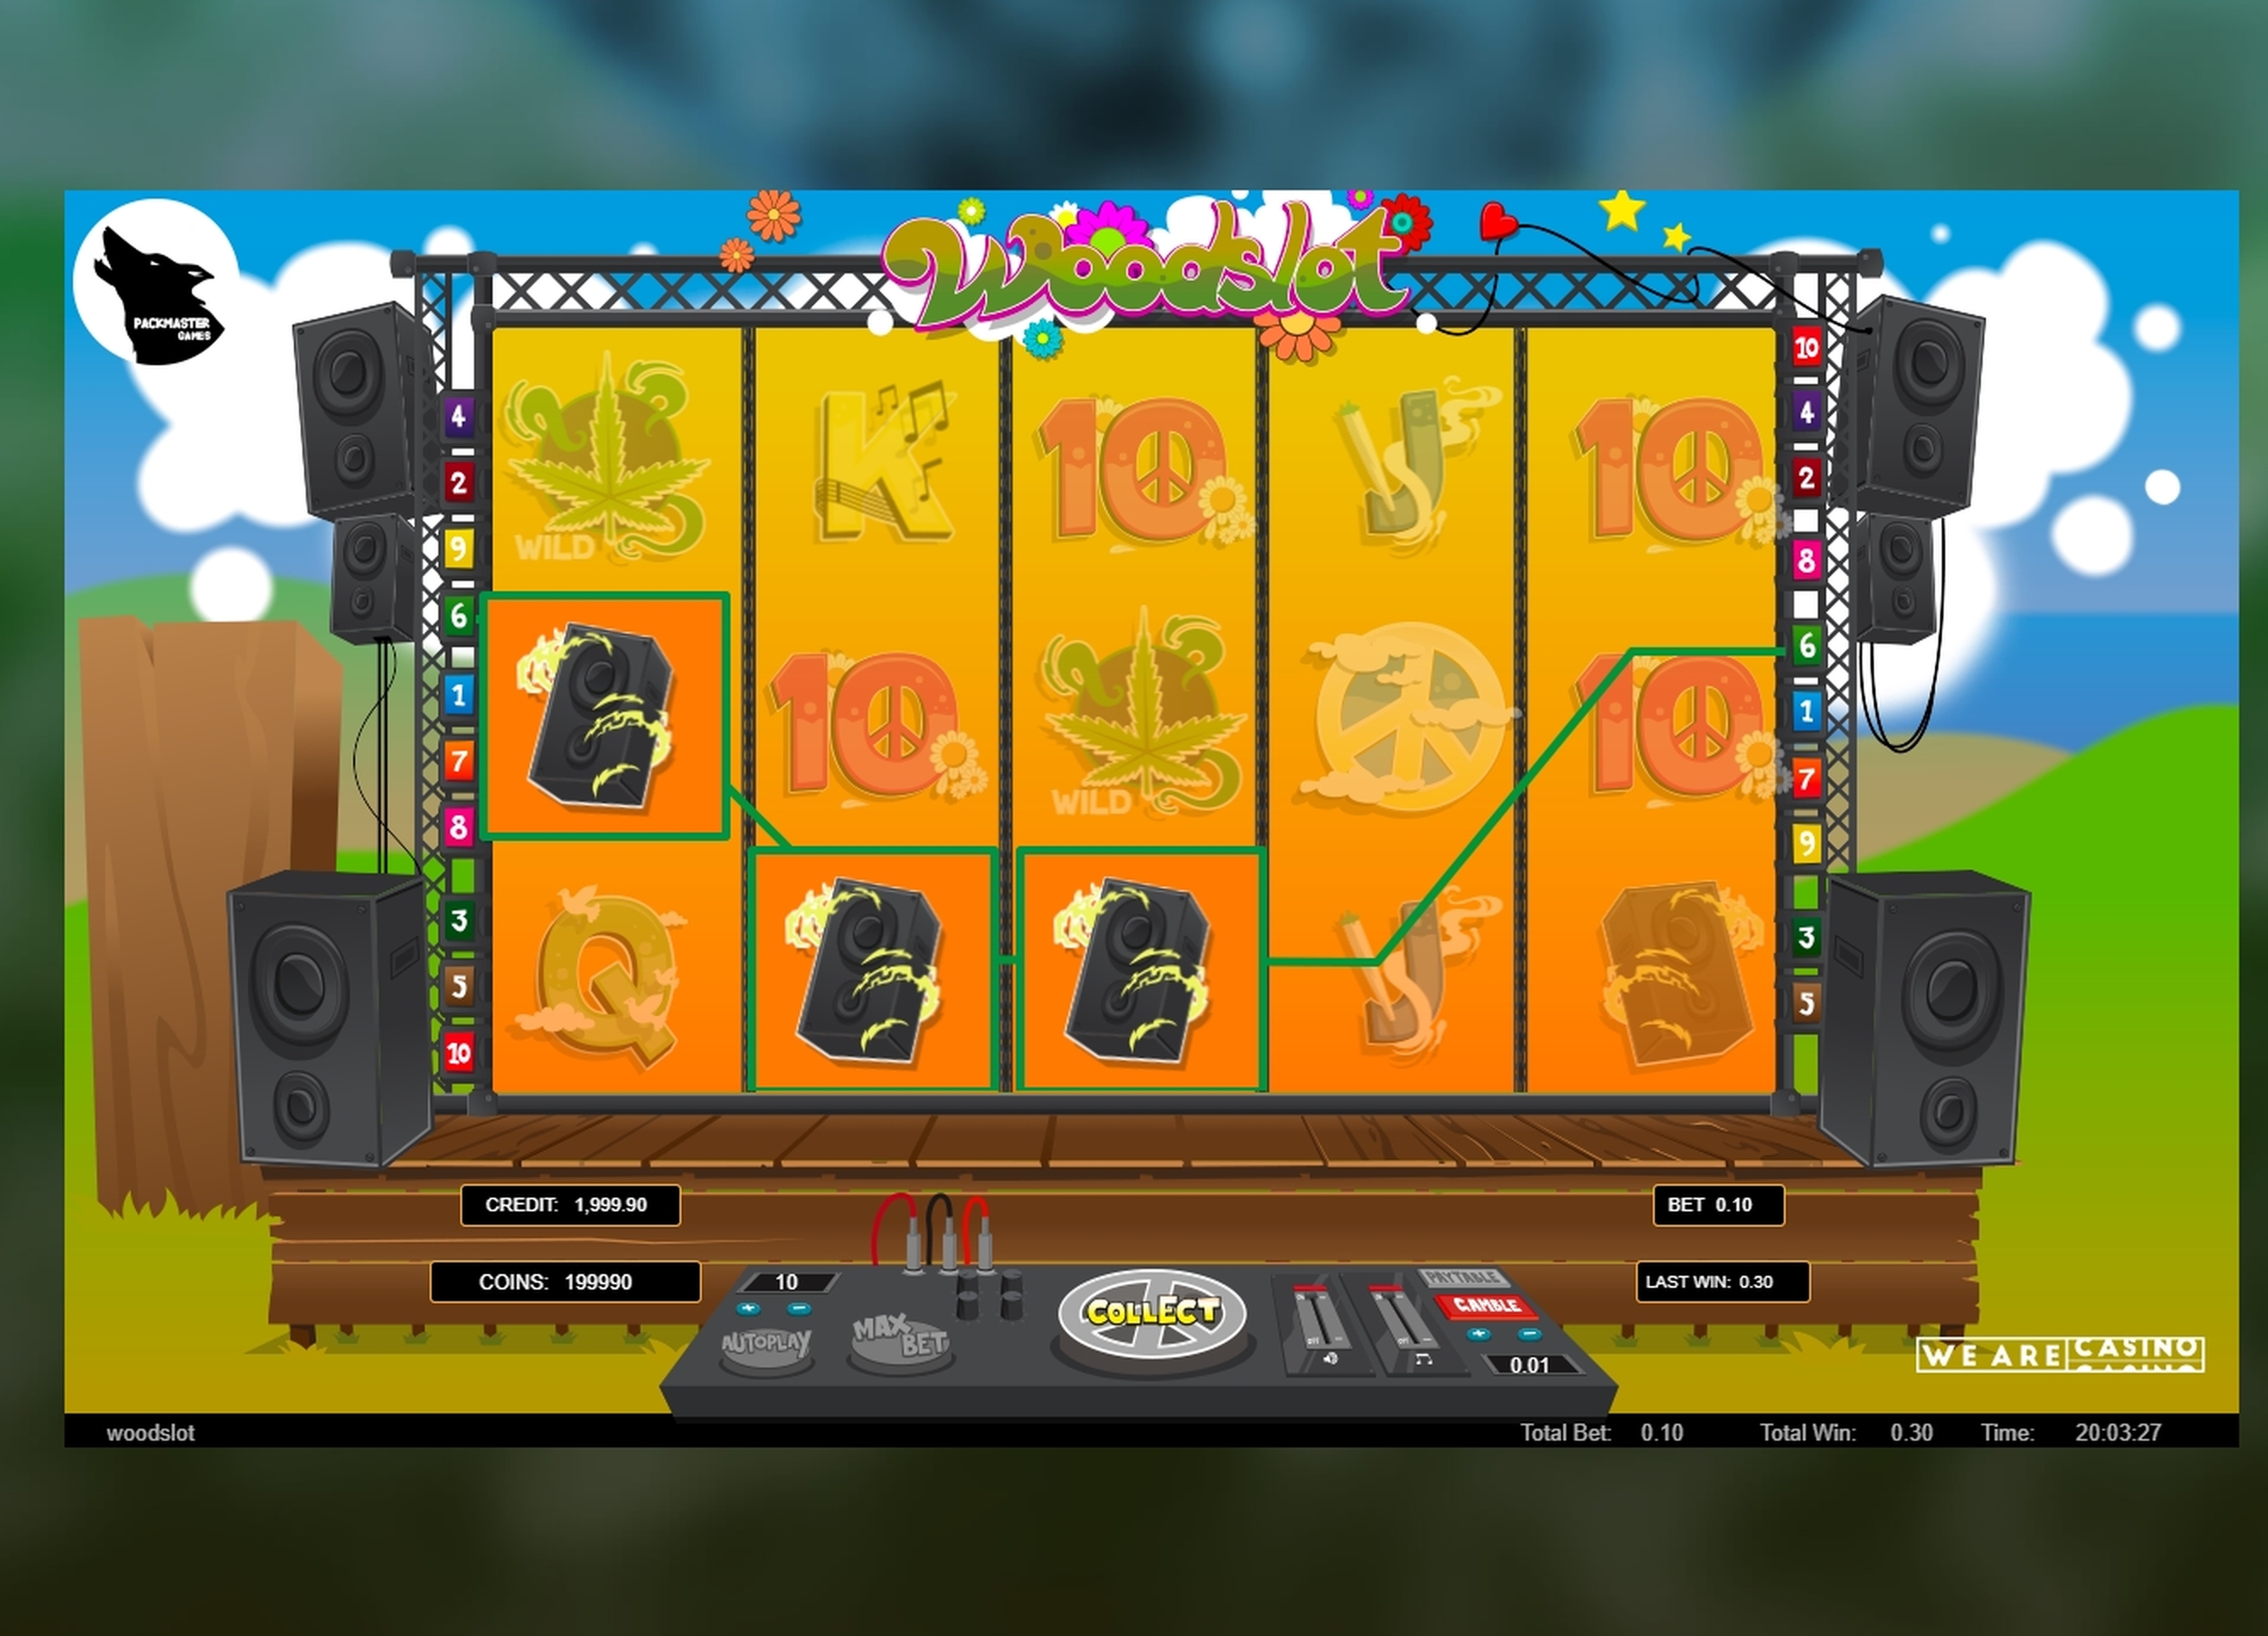 Win Money in Woodslot Free Slot Game by Packmaster Games